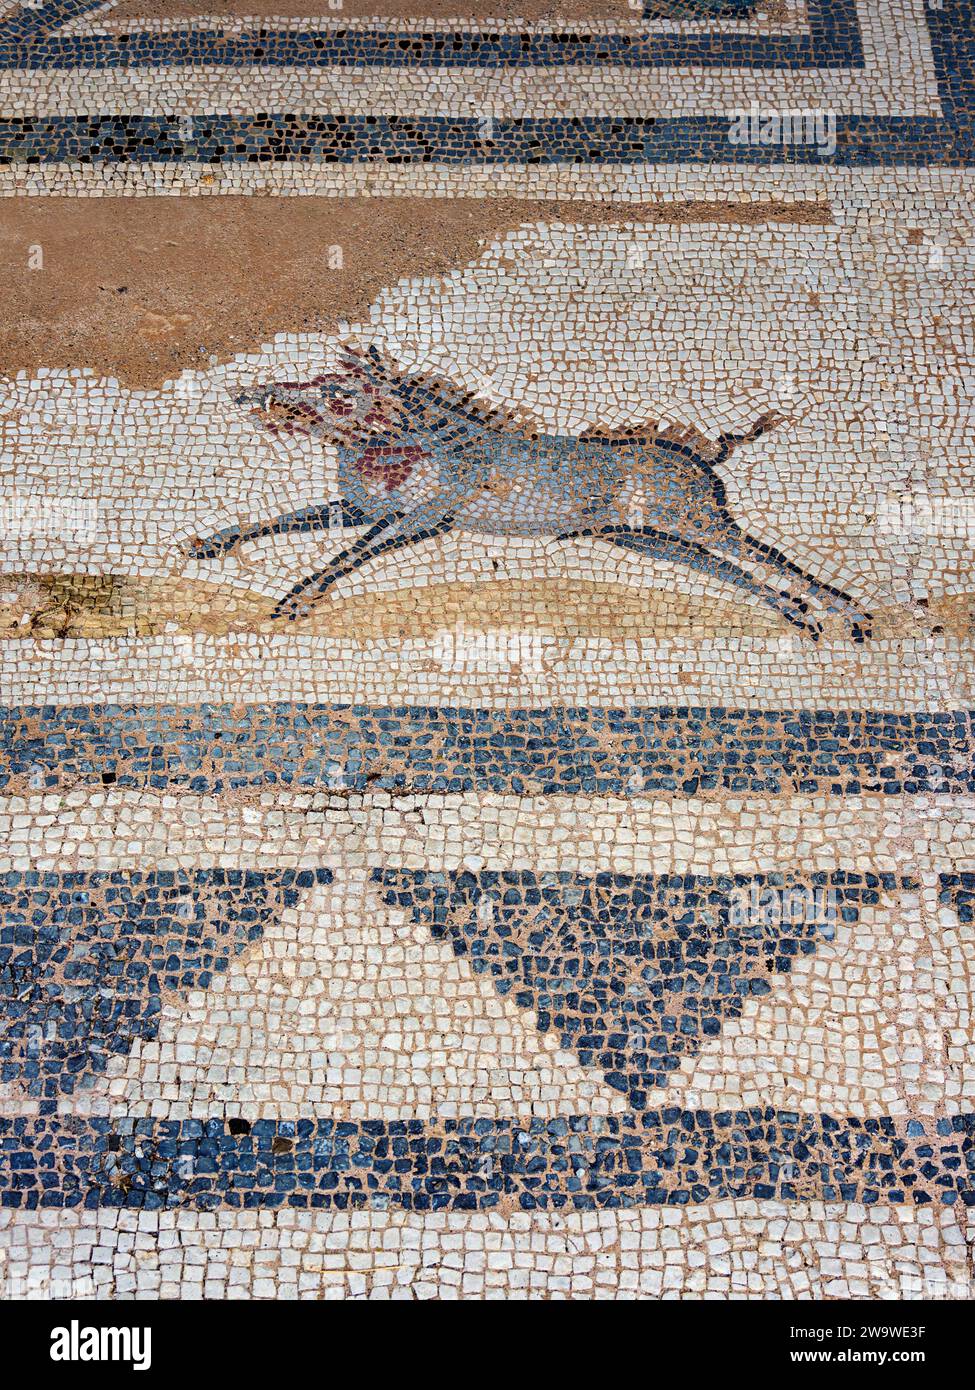 Mosaic Floor at Western Archaeological Zone, Kos Town, Kos Island, Dodecanese, Greece Stock Photo